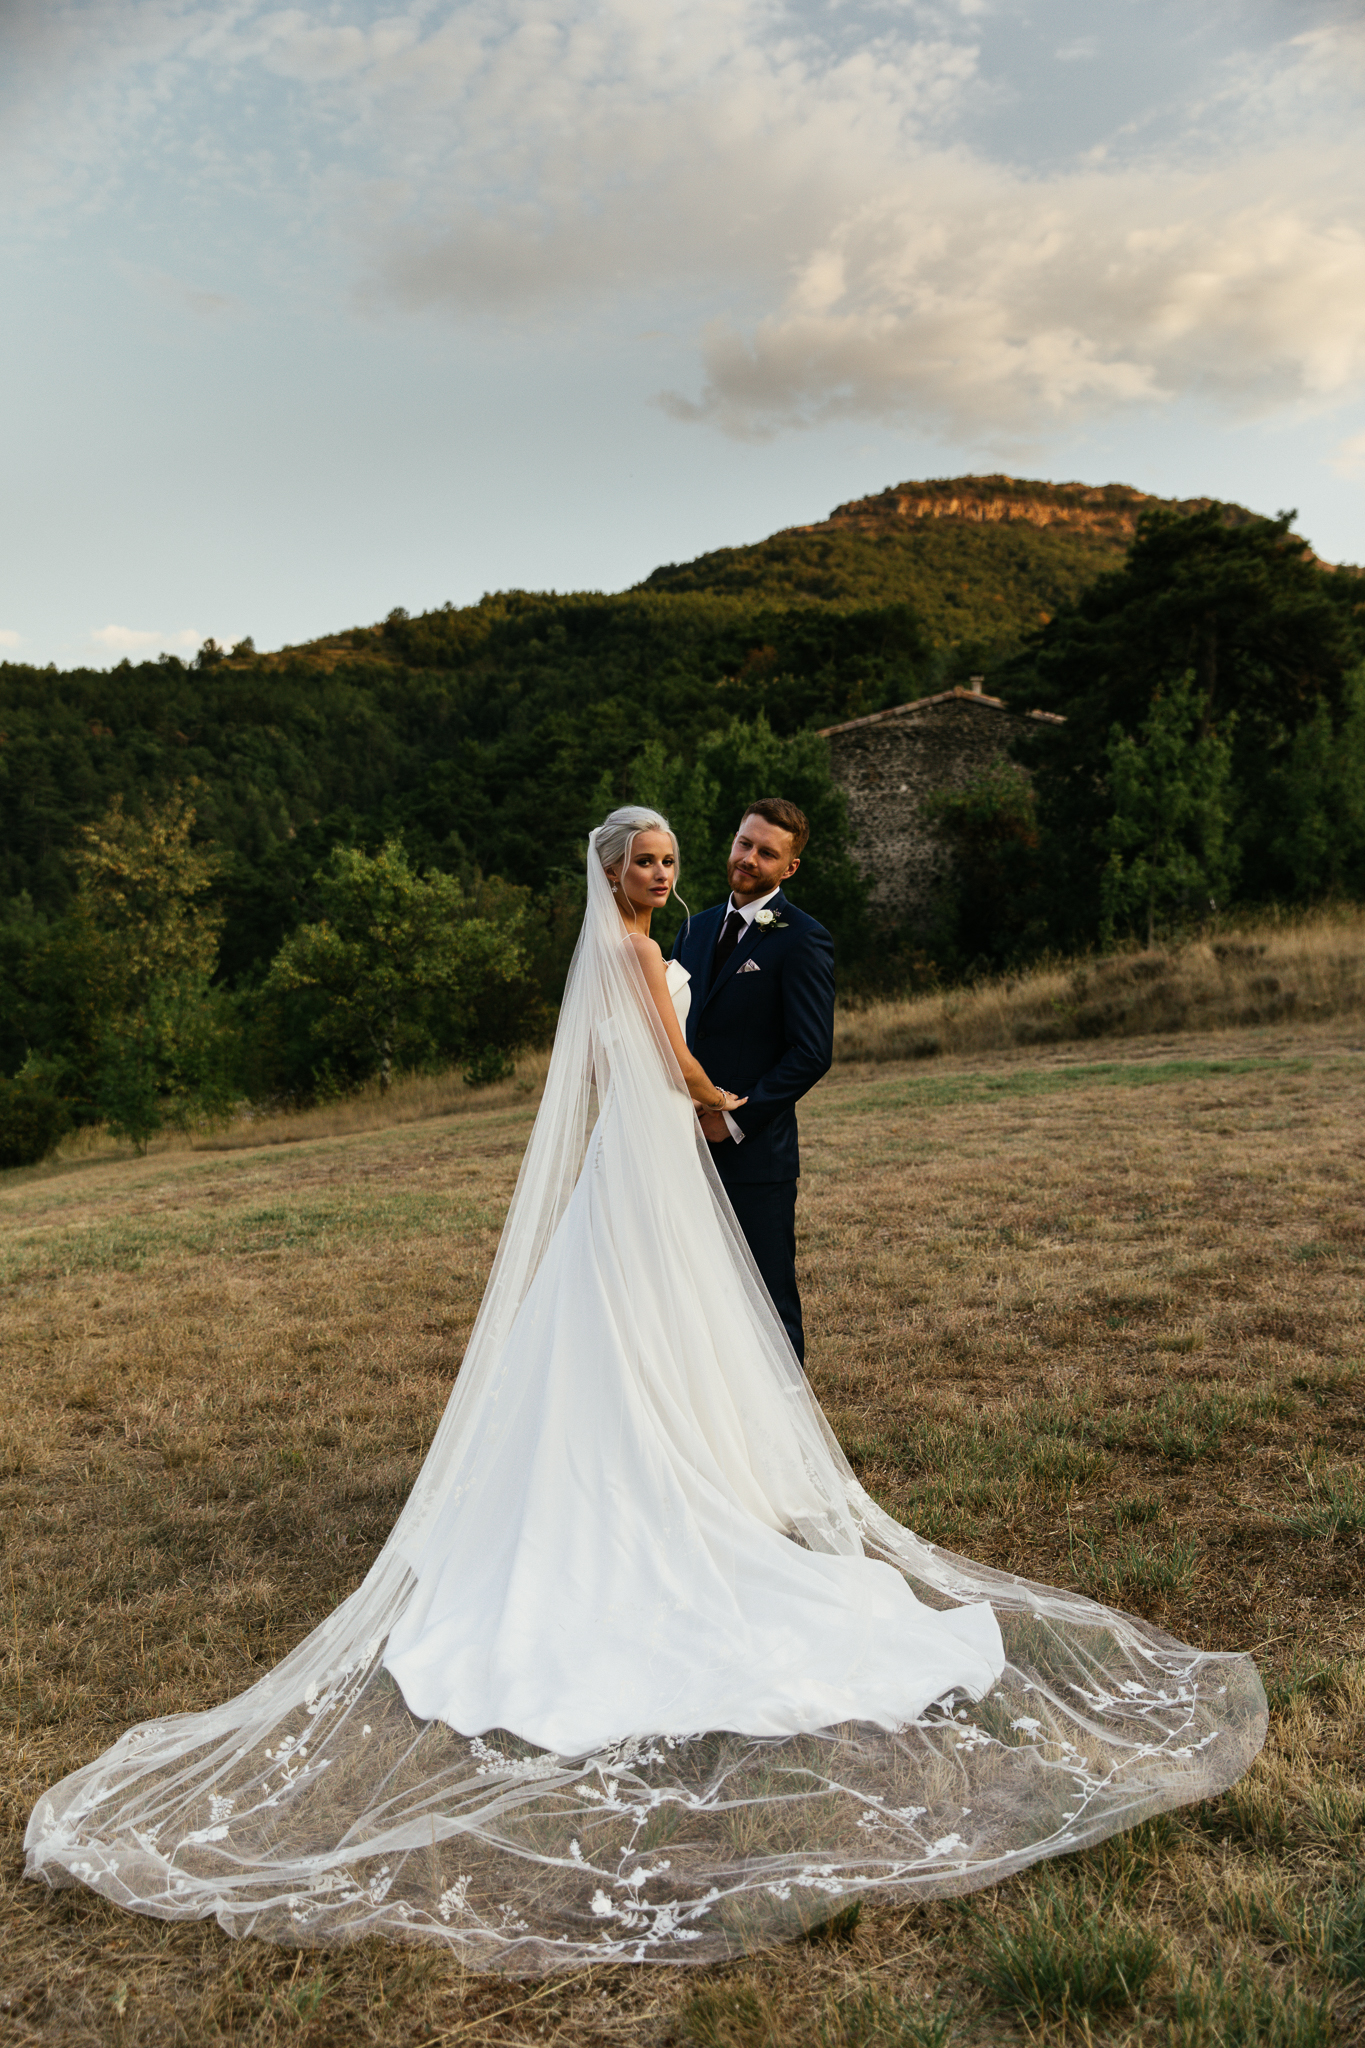 Why I Chose My Couture Bridal Gown for Our French Wedding - Inthefrow